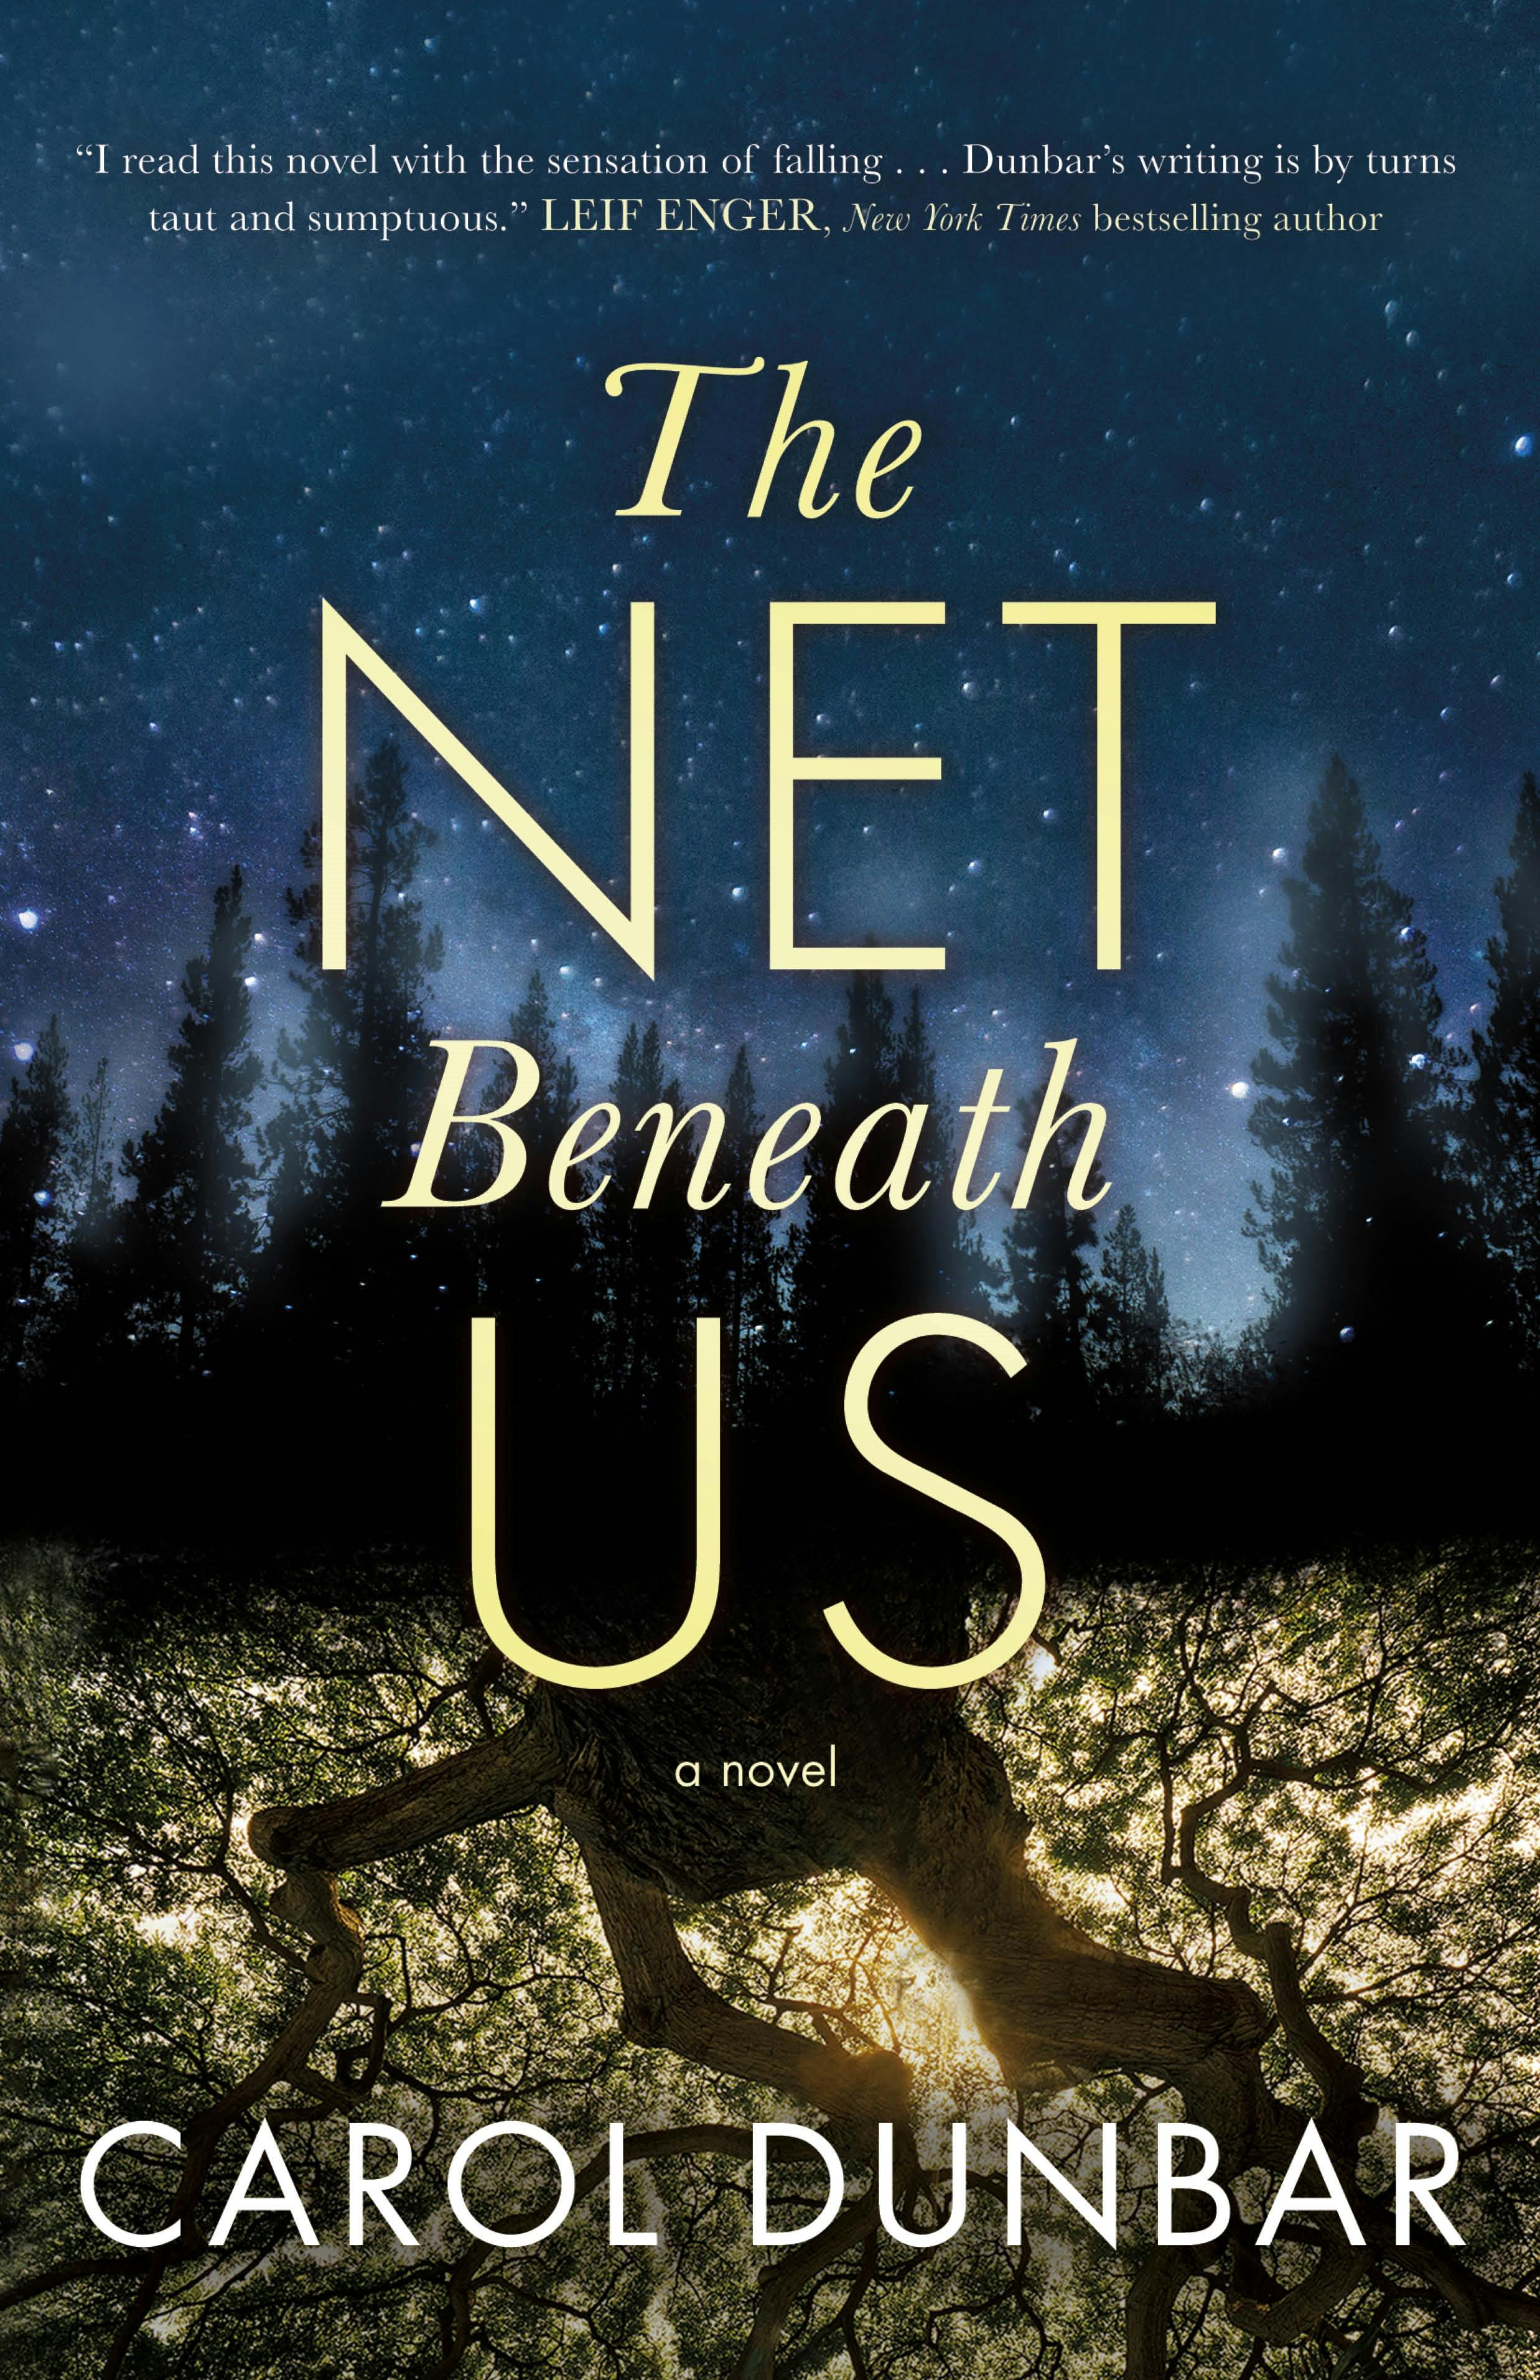 Cover for the book titled as: The Net Beneath Us